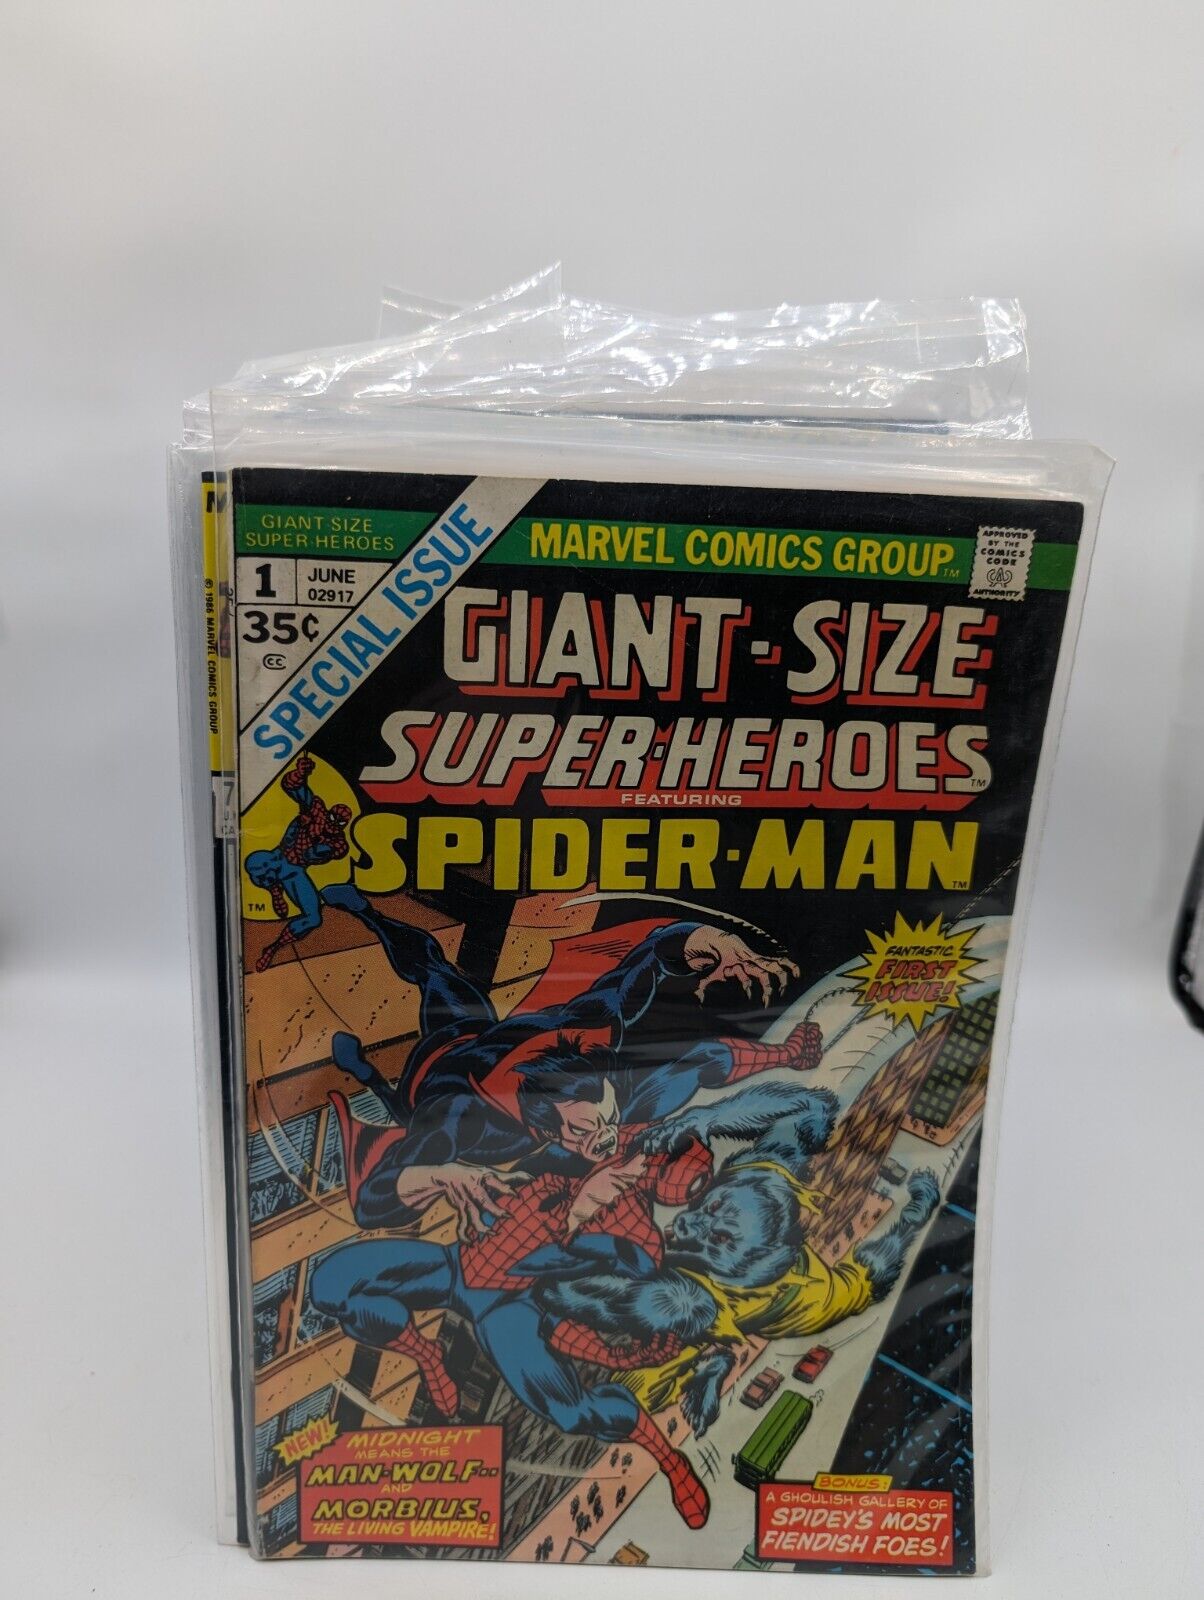 GIANT-SIZE SUPER-HEROES #1 MAN-WOLF & MORBIUS TEAM-UP MARVEL COMICS 1974